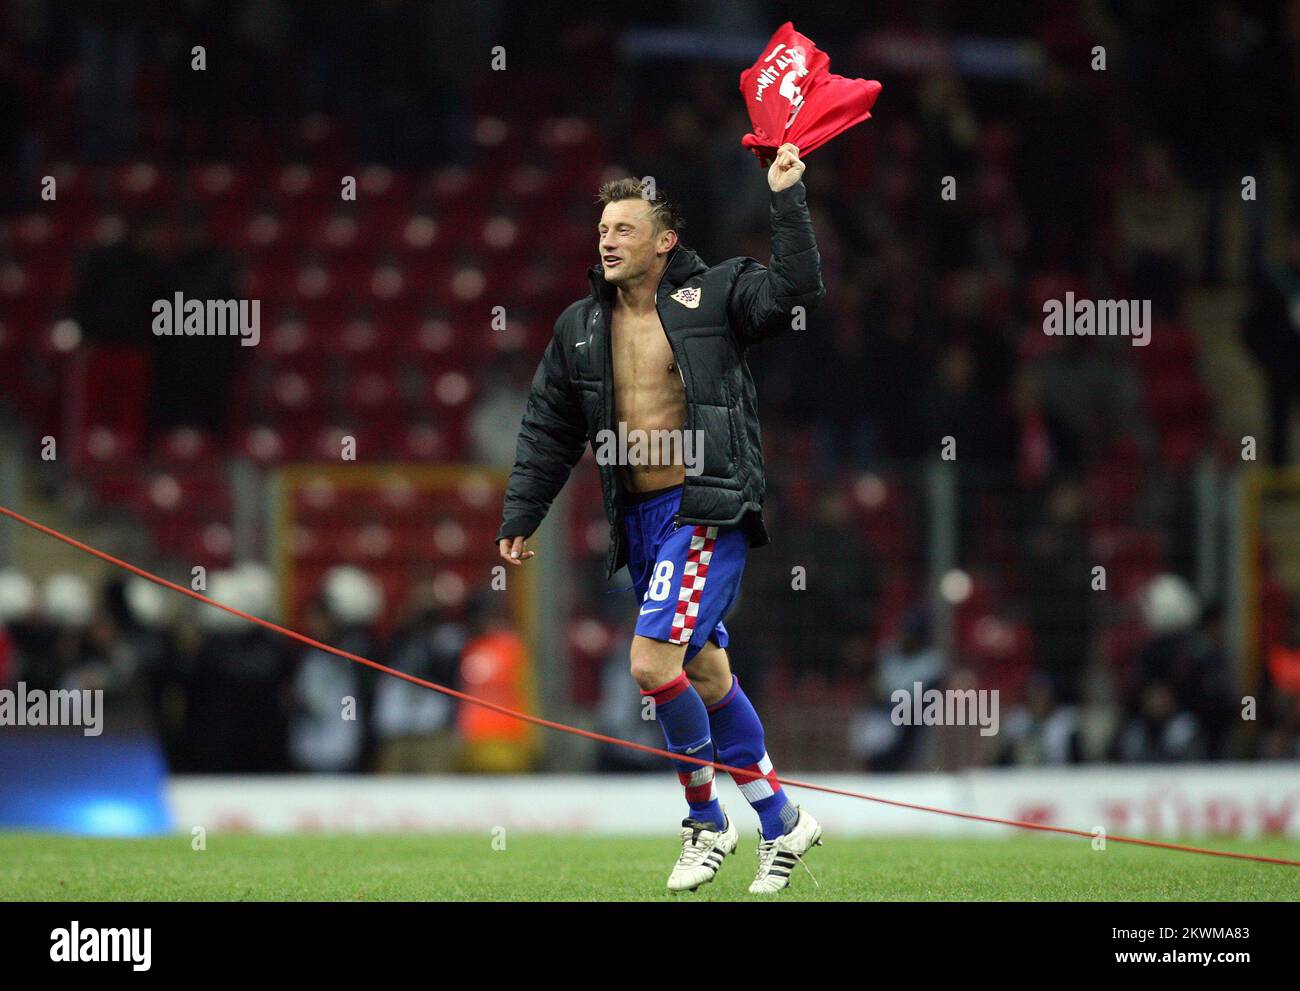 Croatia's Ivica Olic celebrates victory after the match Stock Photo